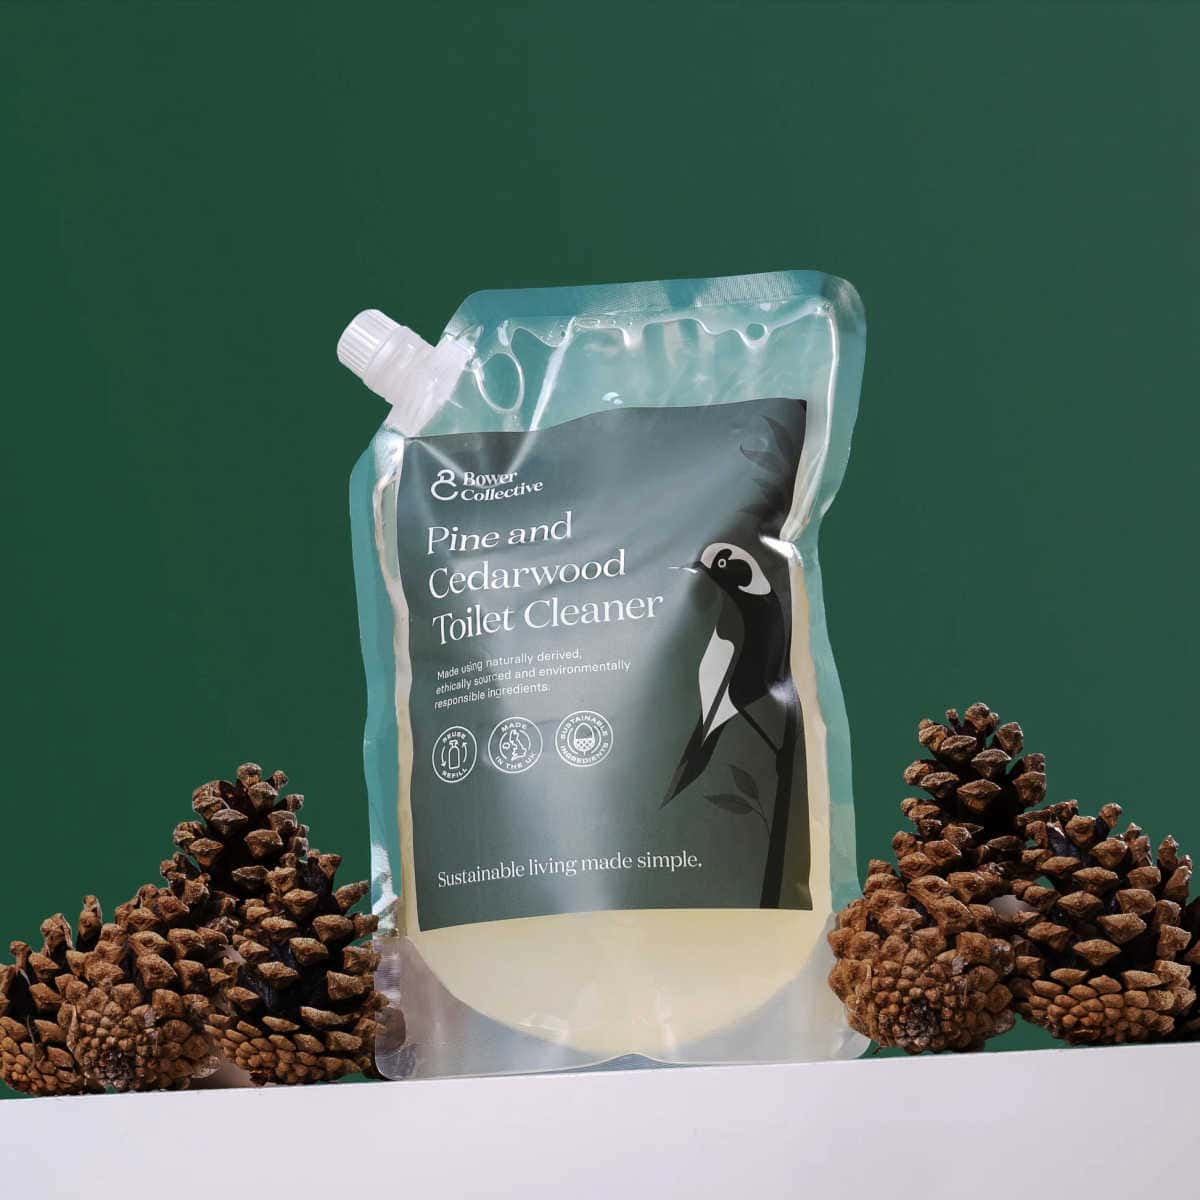 Refill pouch of pine and cedarwood toilet cleaner from Bower Collective on surrounded by pine cones and on a green background.